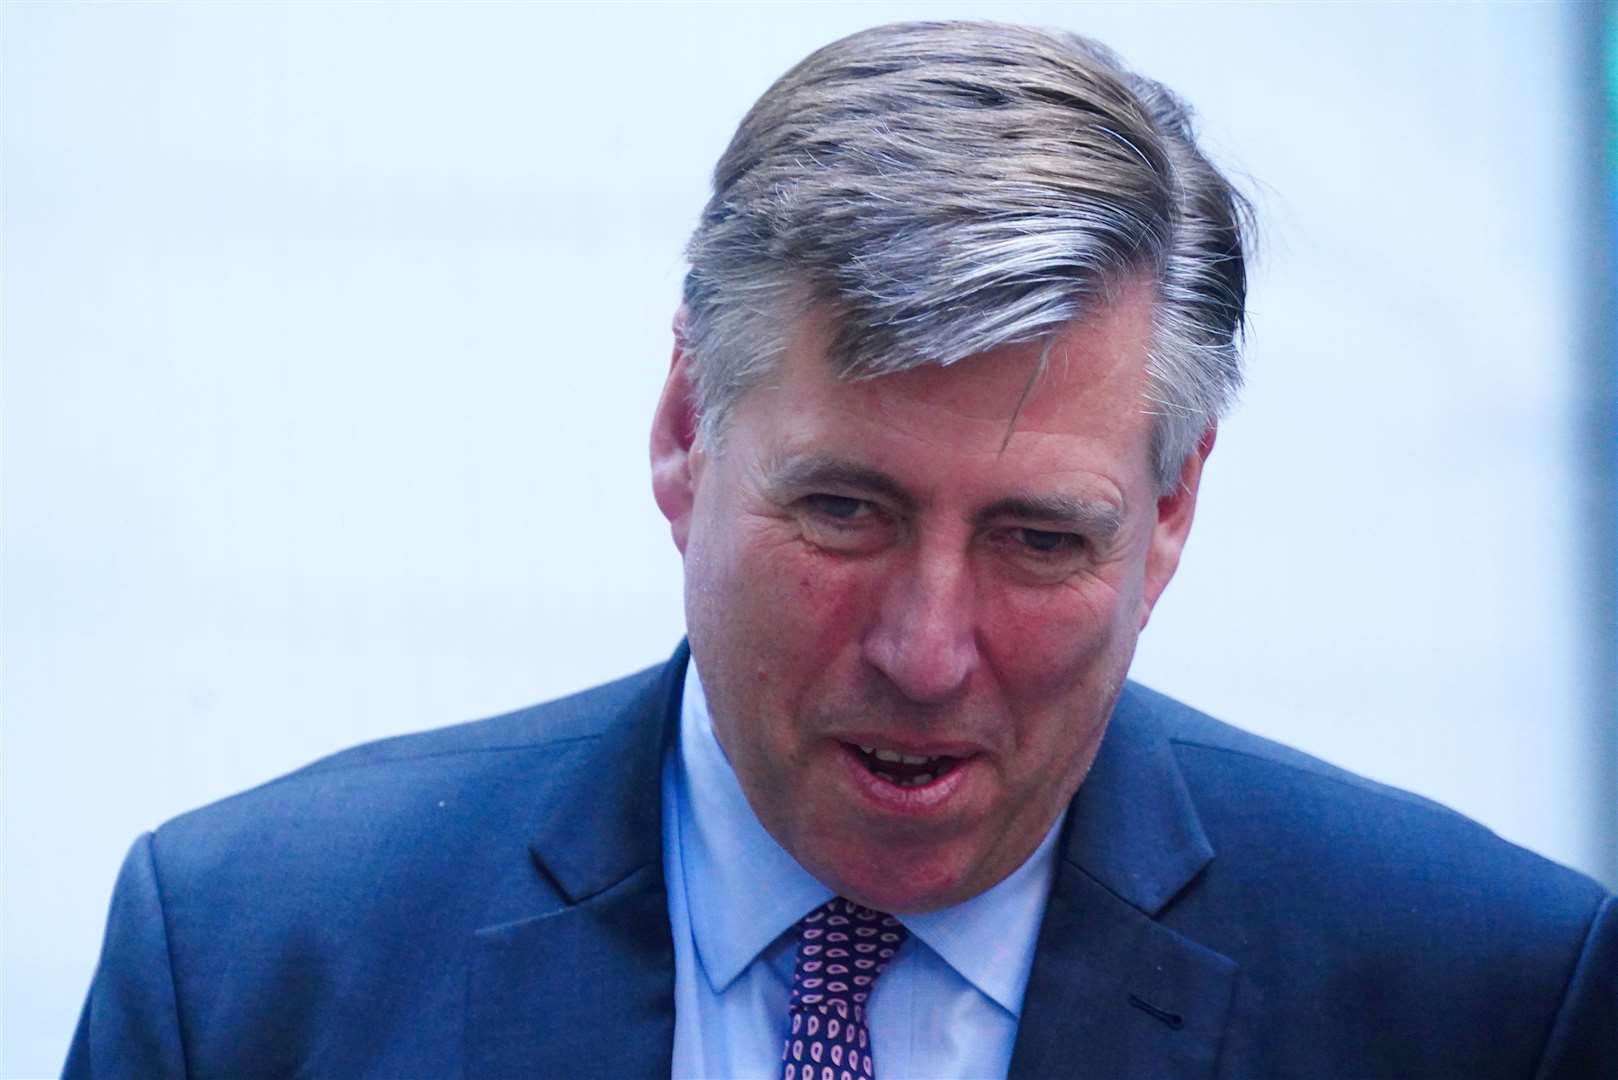 Sir Graham Brady said he made clear any external employment had to be transparent (Victoria Jones/PA)